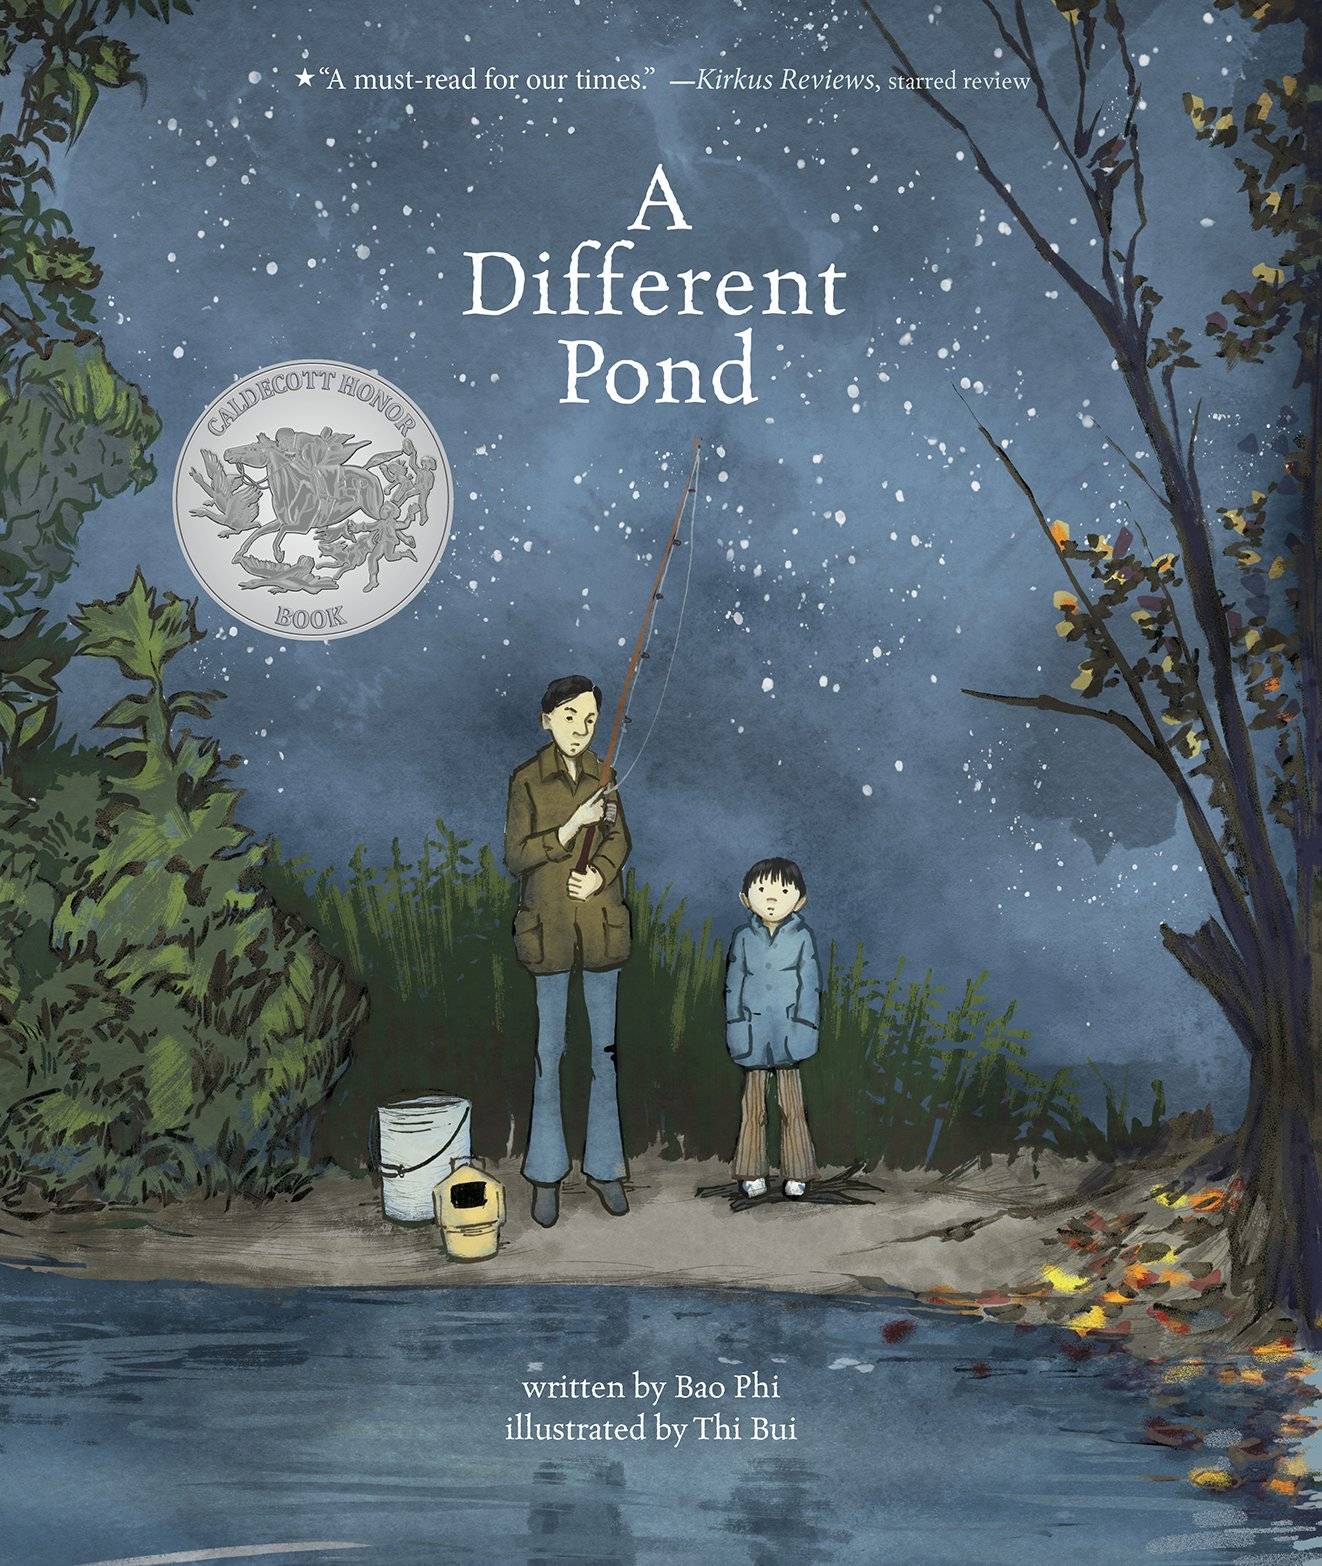 Illustrated book cover with an adult and a child standing at the edge of some water fishing.